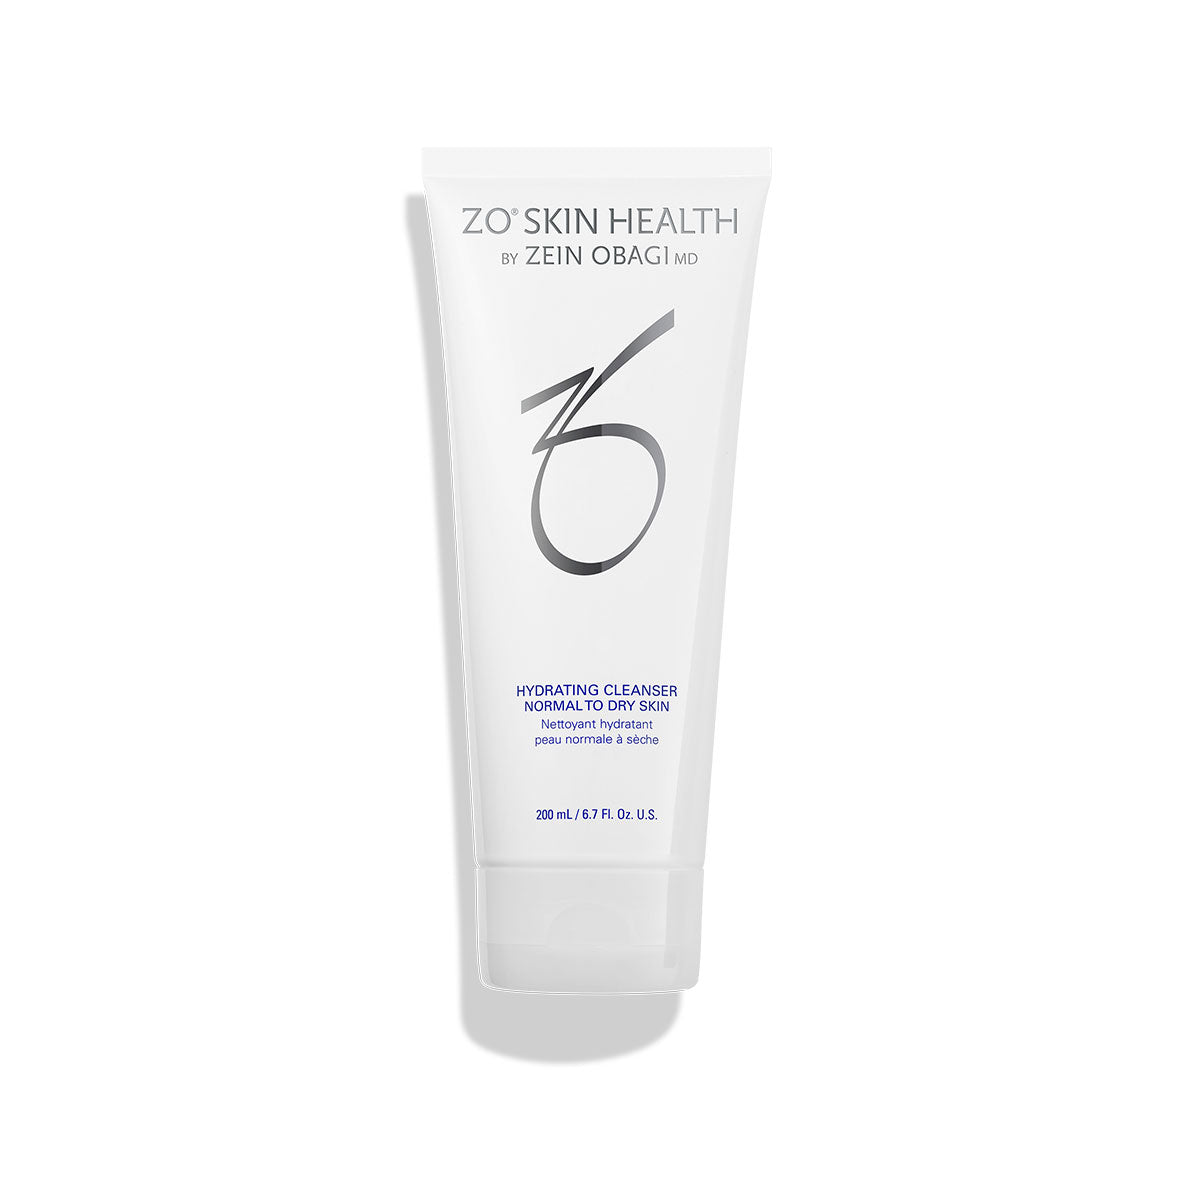 zo skin health hydrating cleanser for normal to dry skin face wash